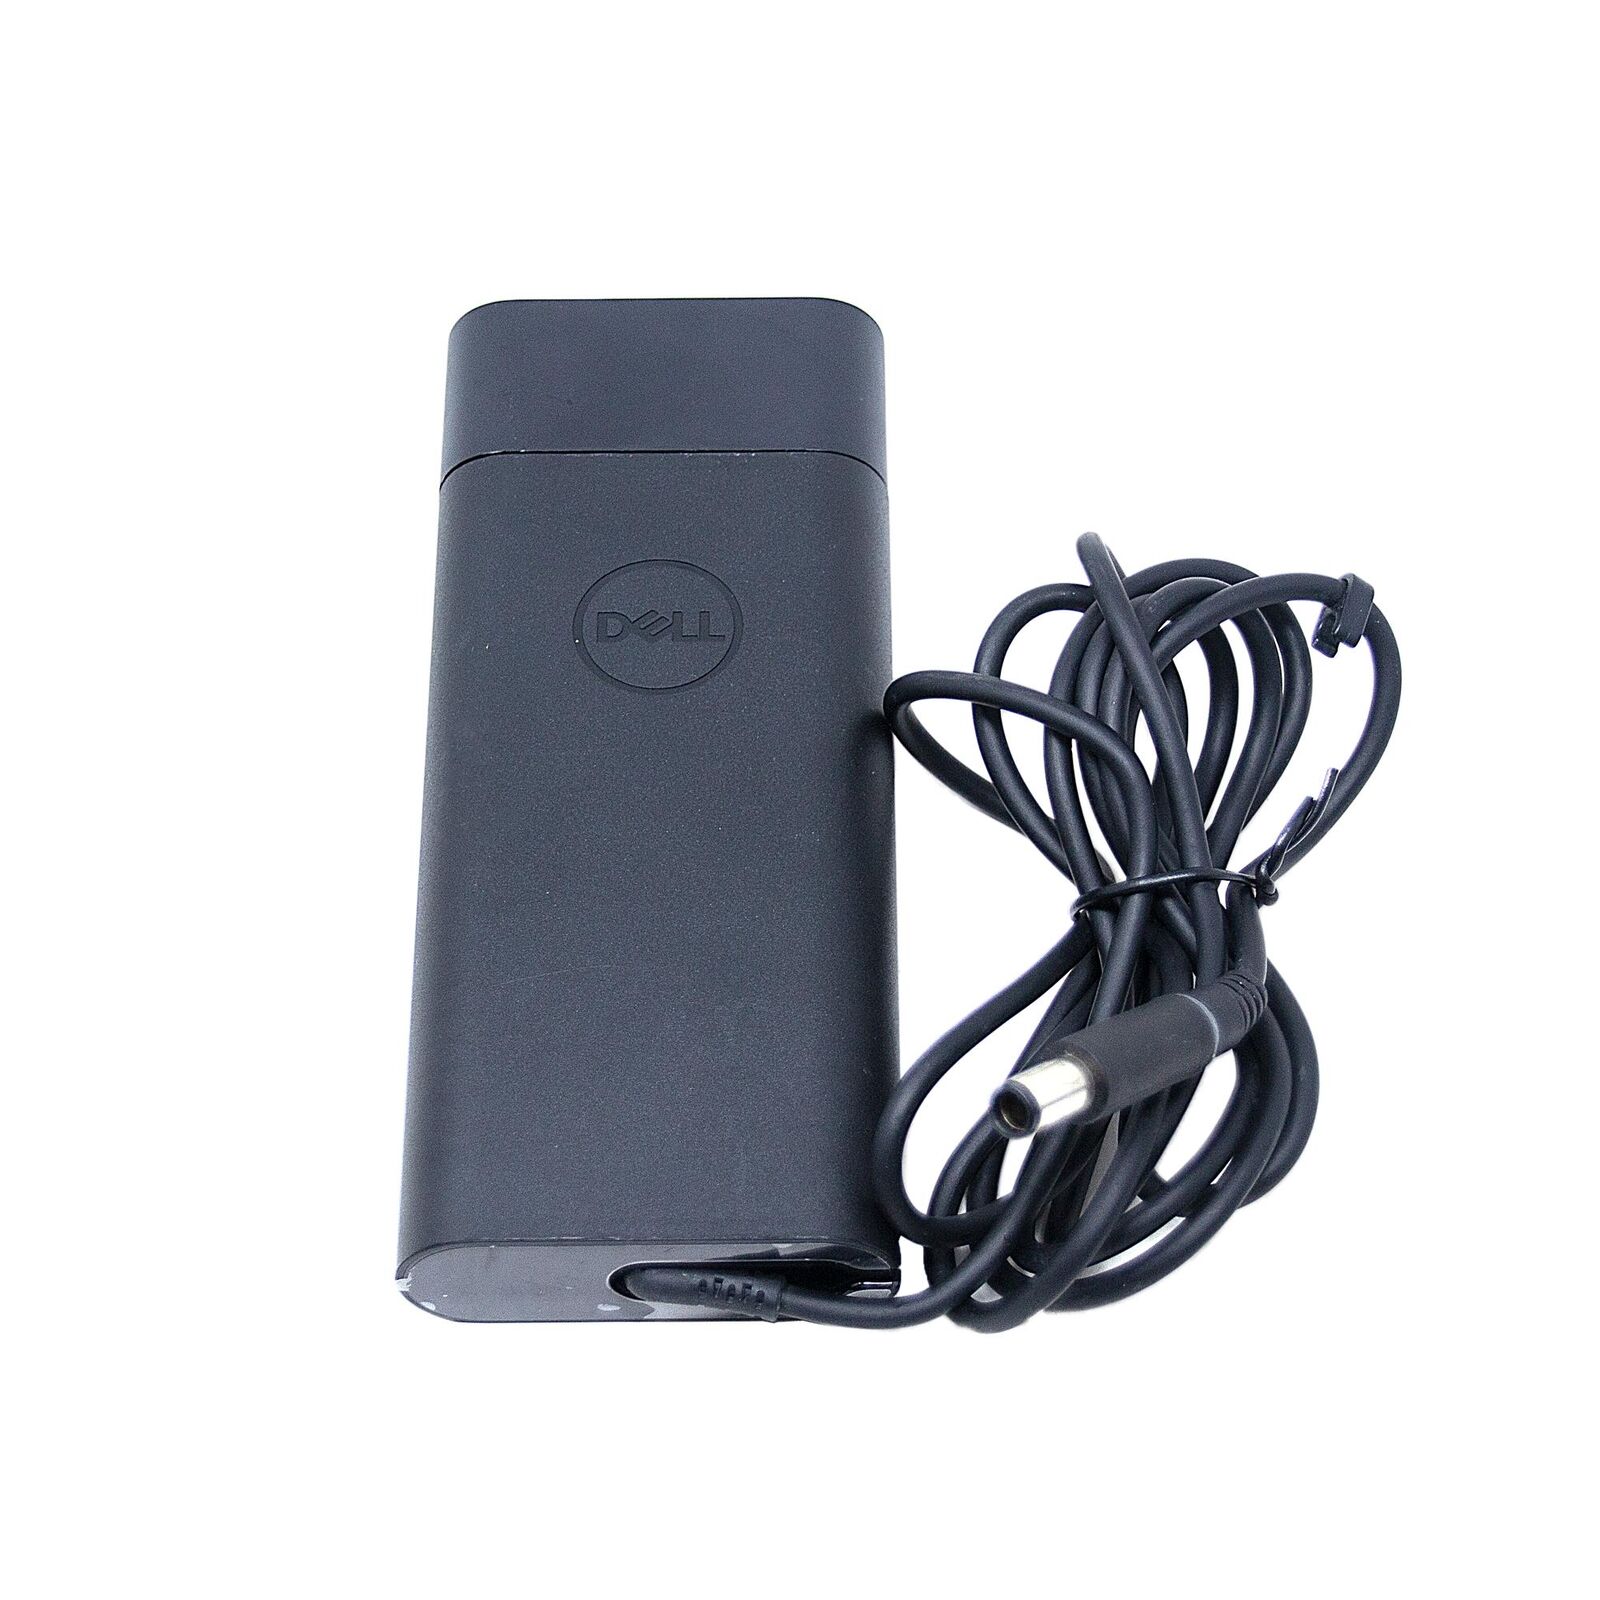 DELL Inspiron 17R N7110 P14E 90W Genuine Original AC Power Adapter Charger